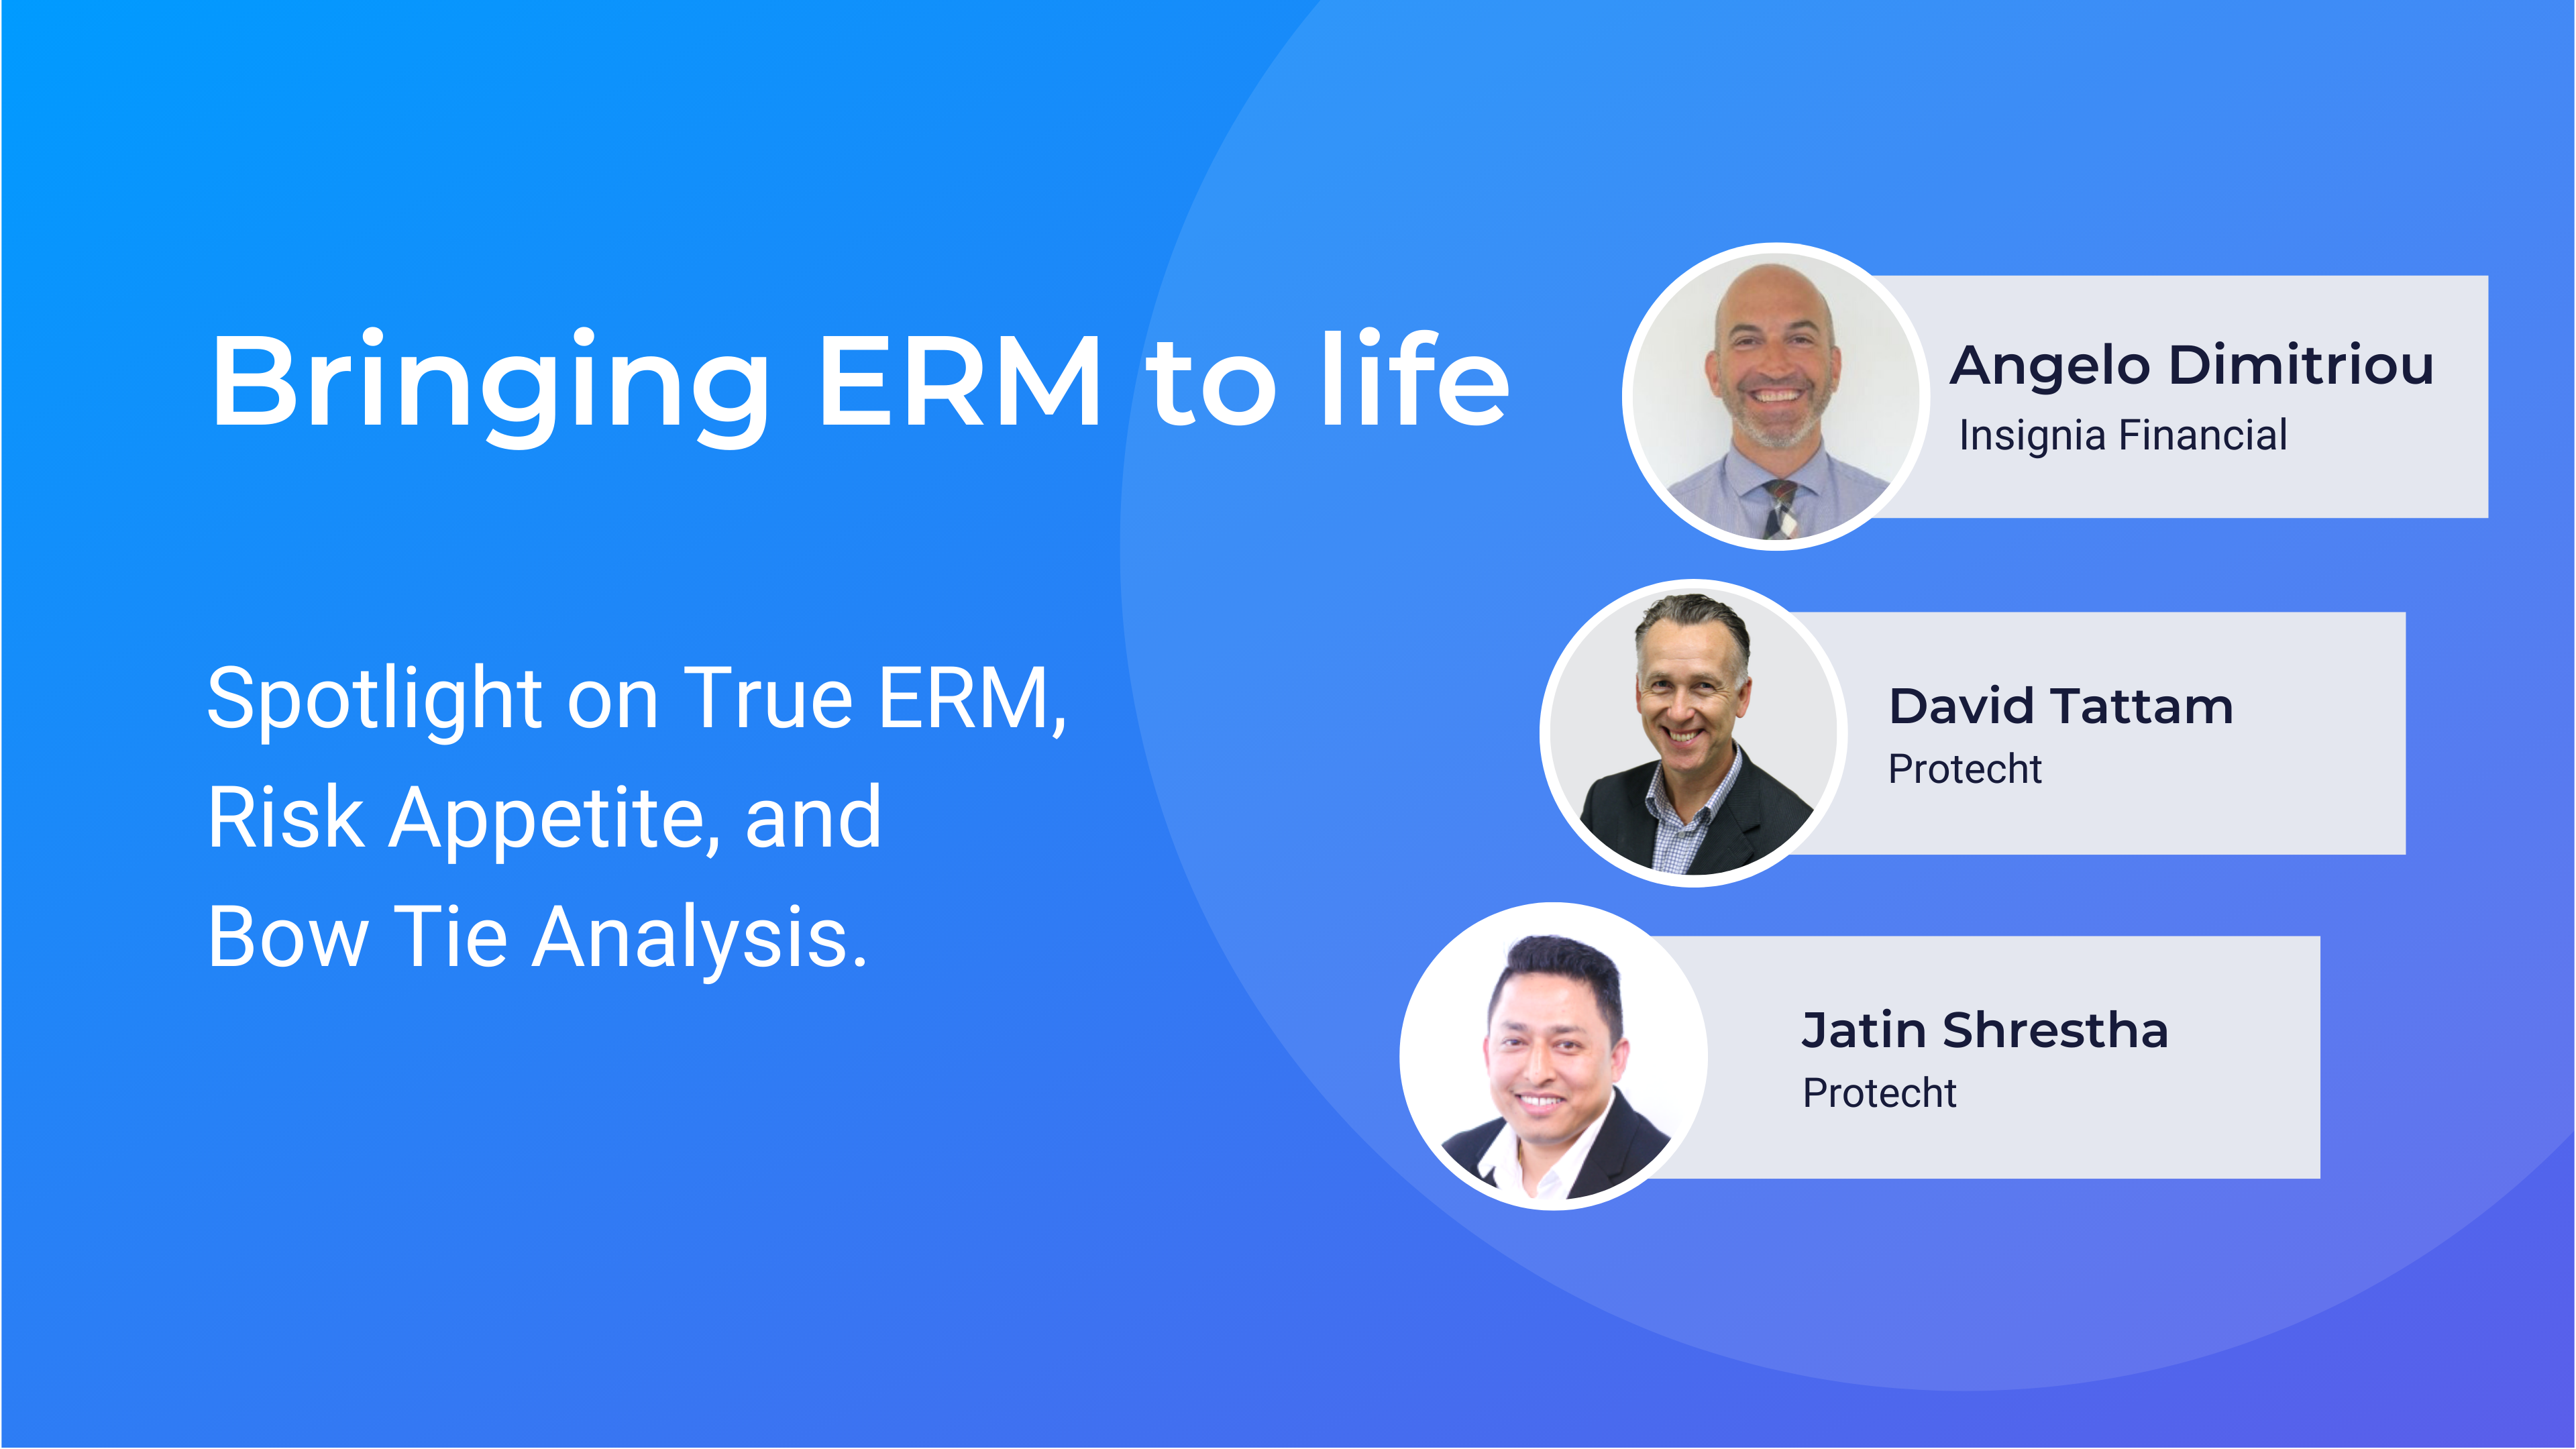 Bringing ERM to life: Spotlight on True ERM, Risk Appetite, and Bow Tie Analysis webinar featured image